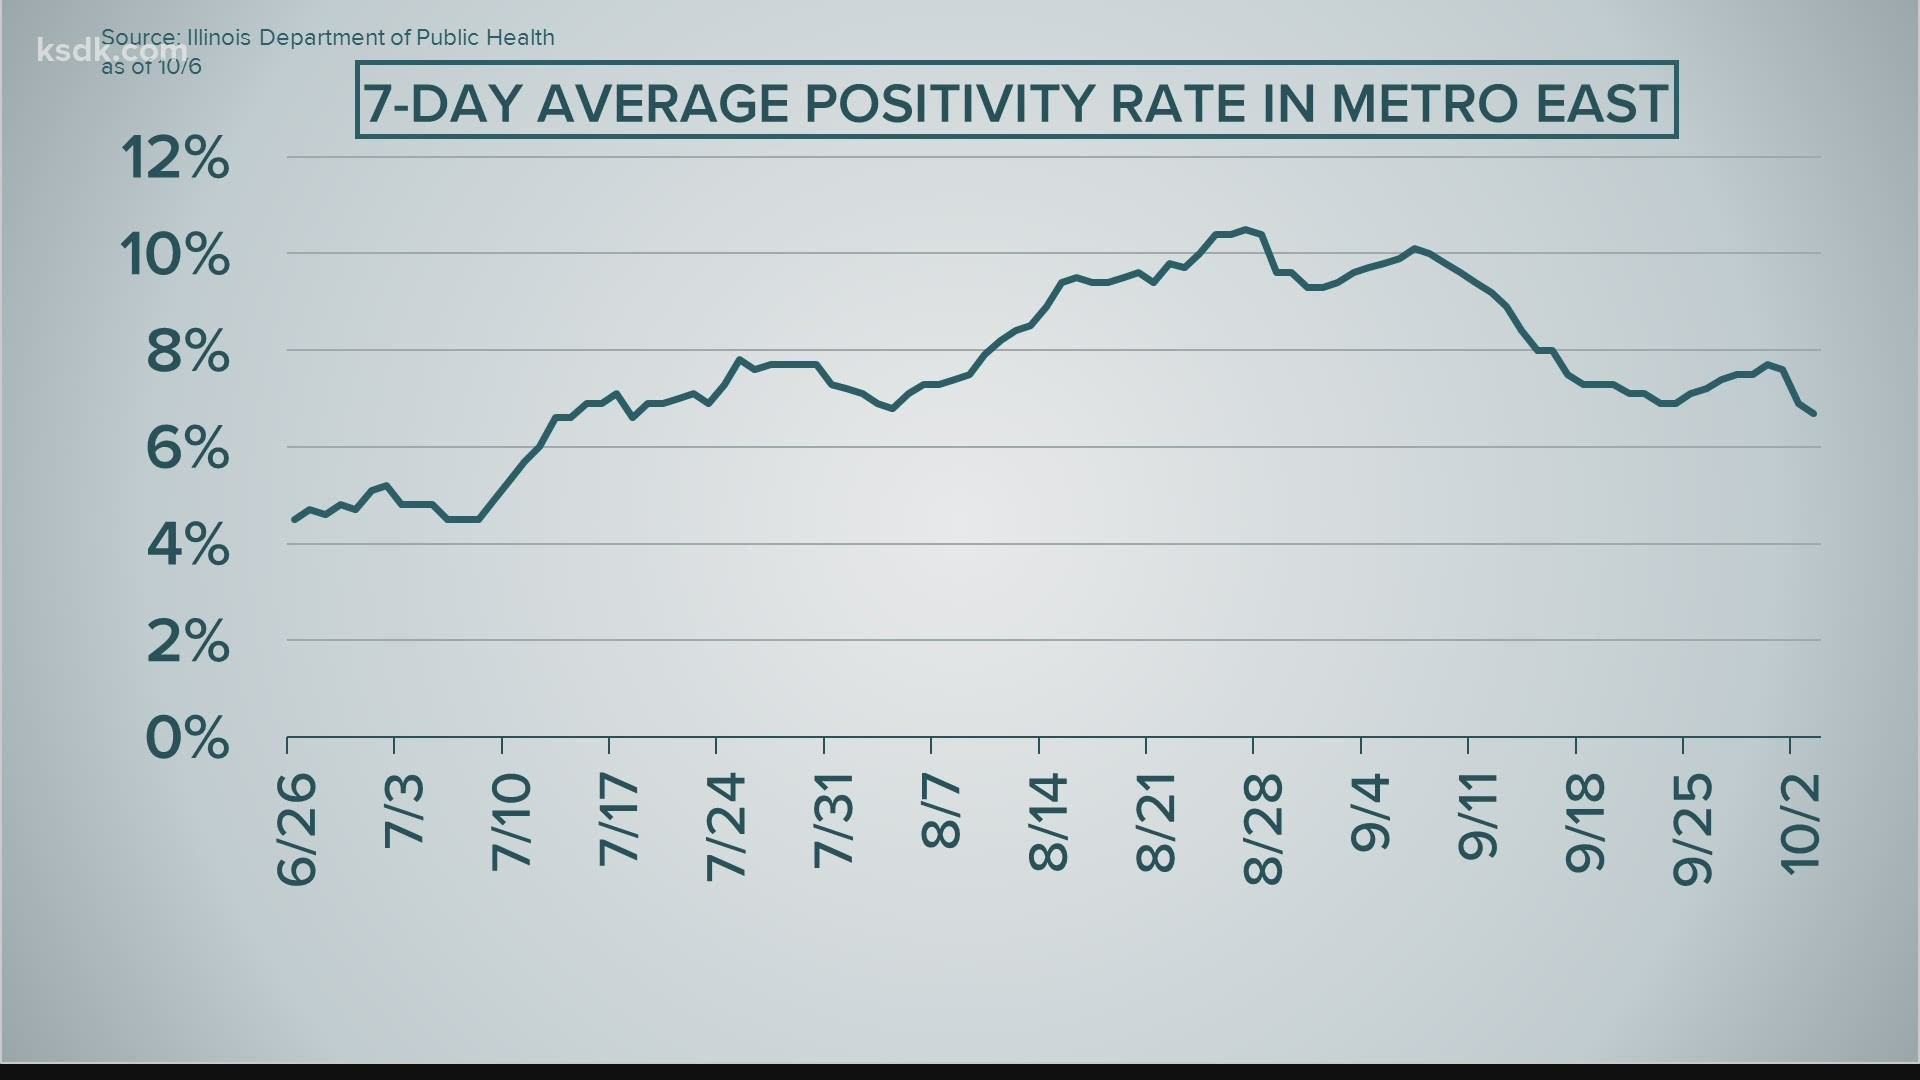 The region's positivity rate dropped to a new low of 6.3% Wednesday morning.